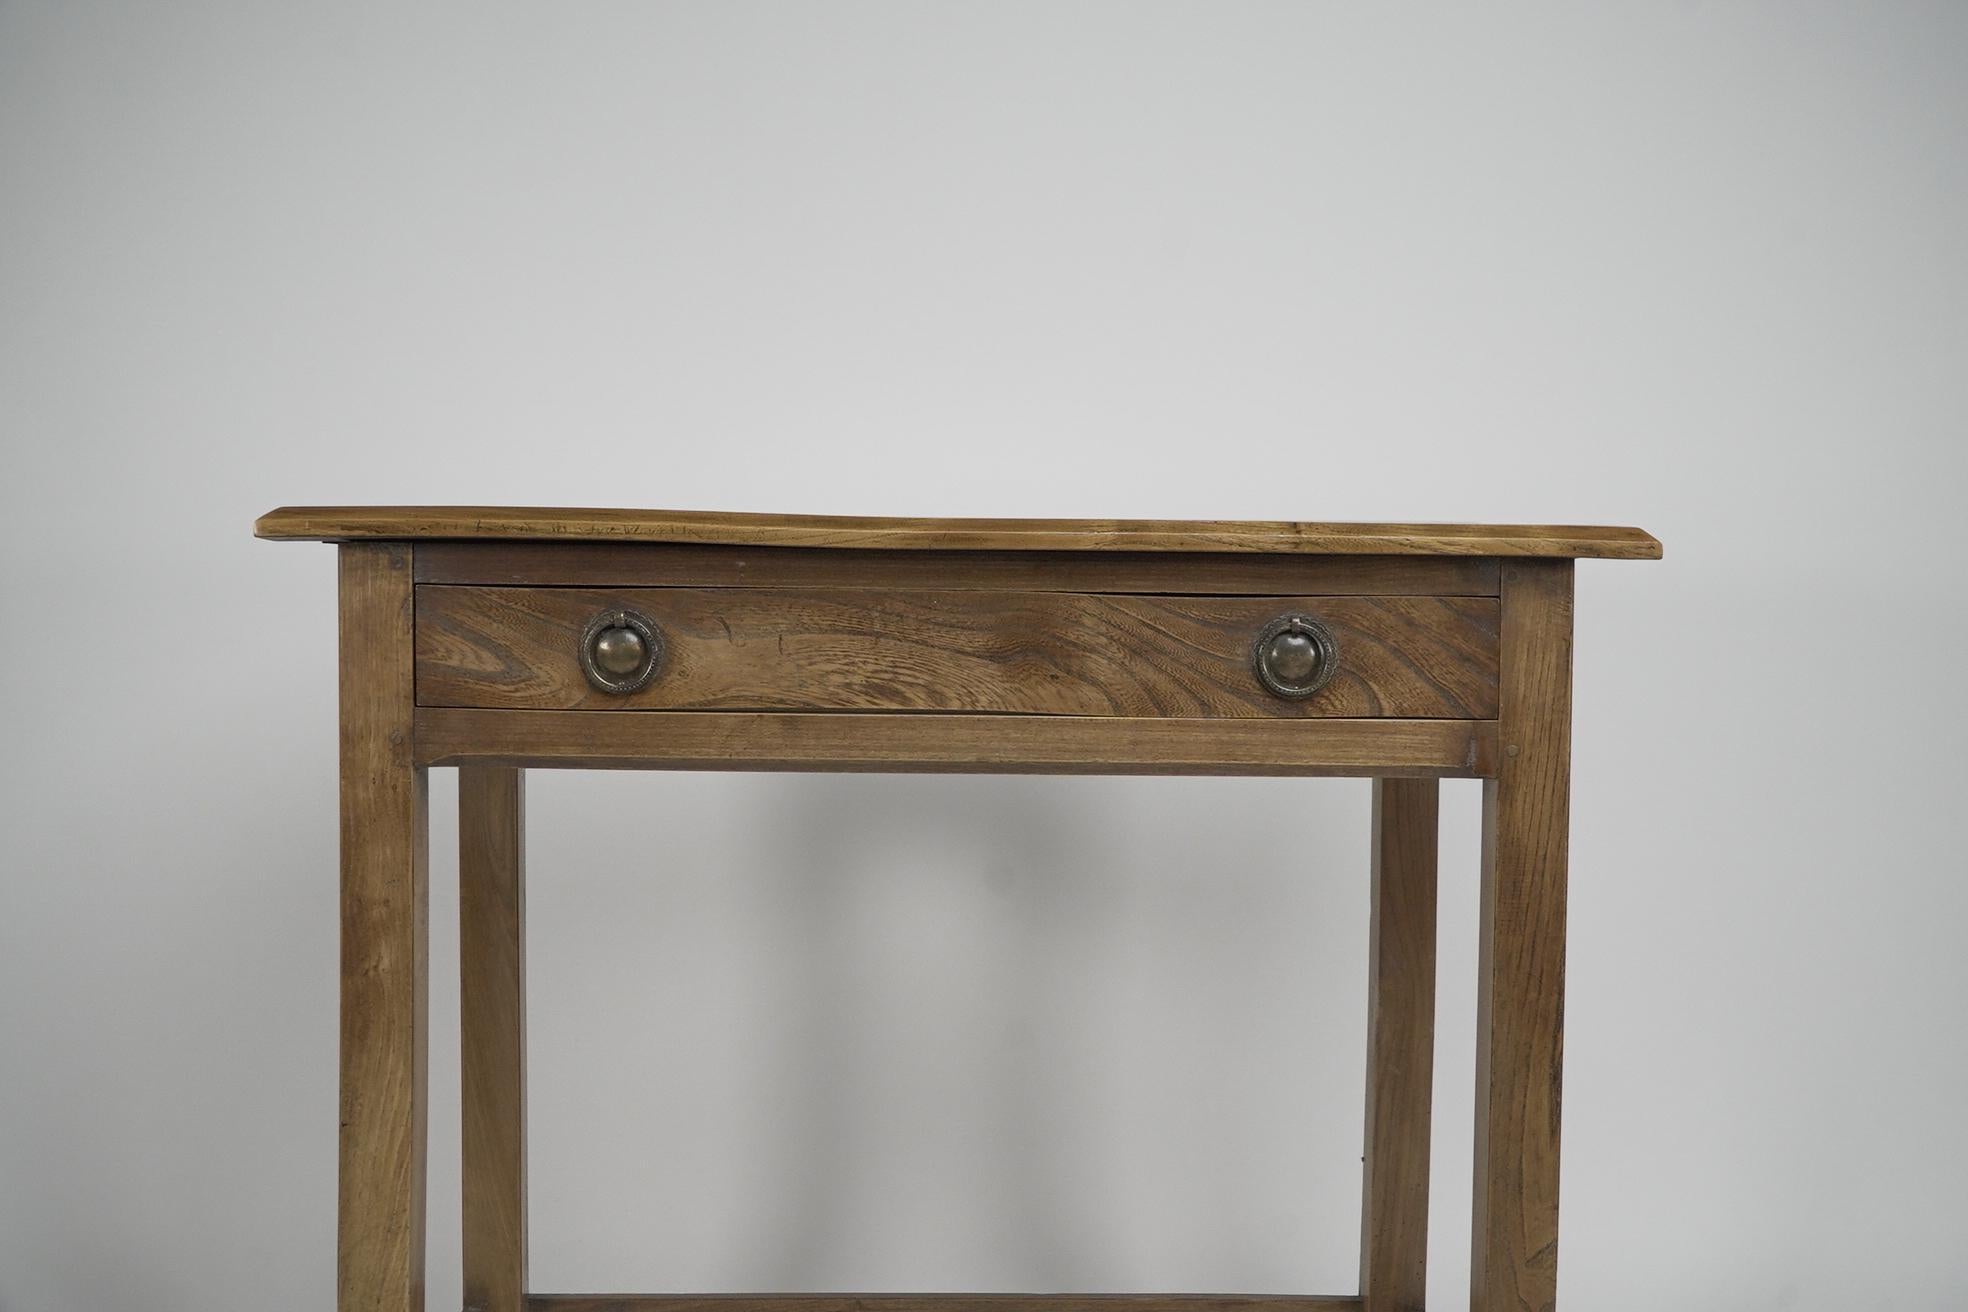 Arts and Crafts Gordon Russell. A fine quality Cotswold School ash single drawer desk For Sale